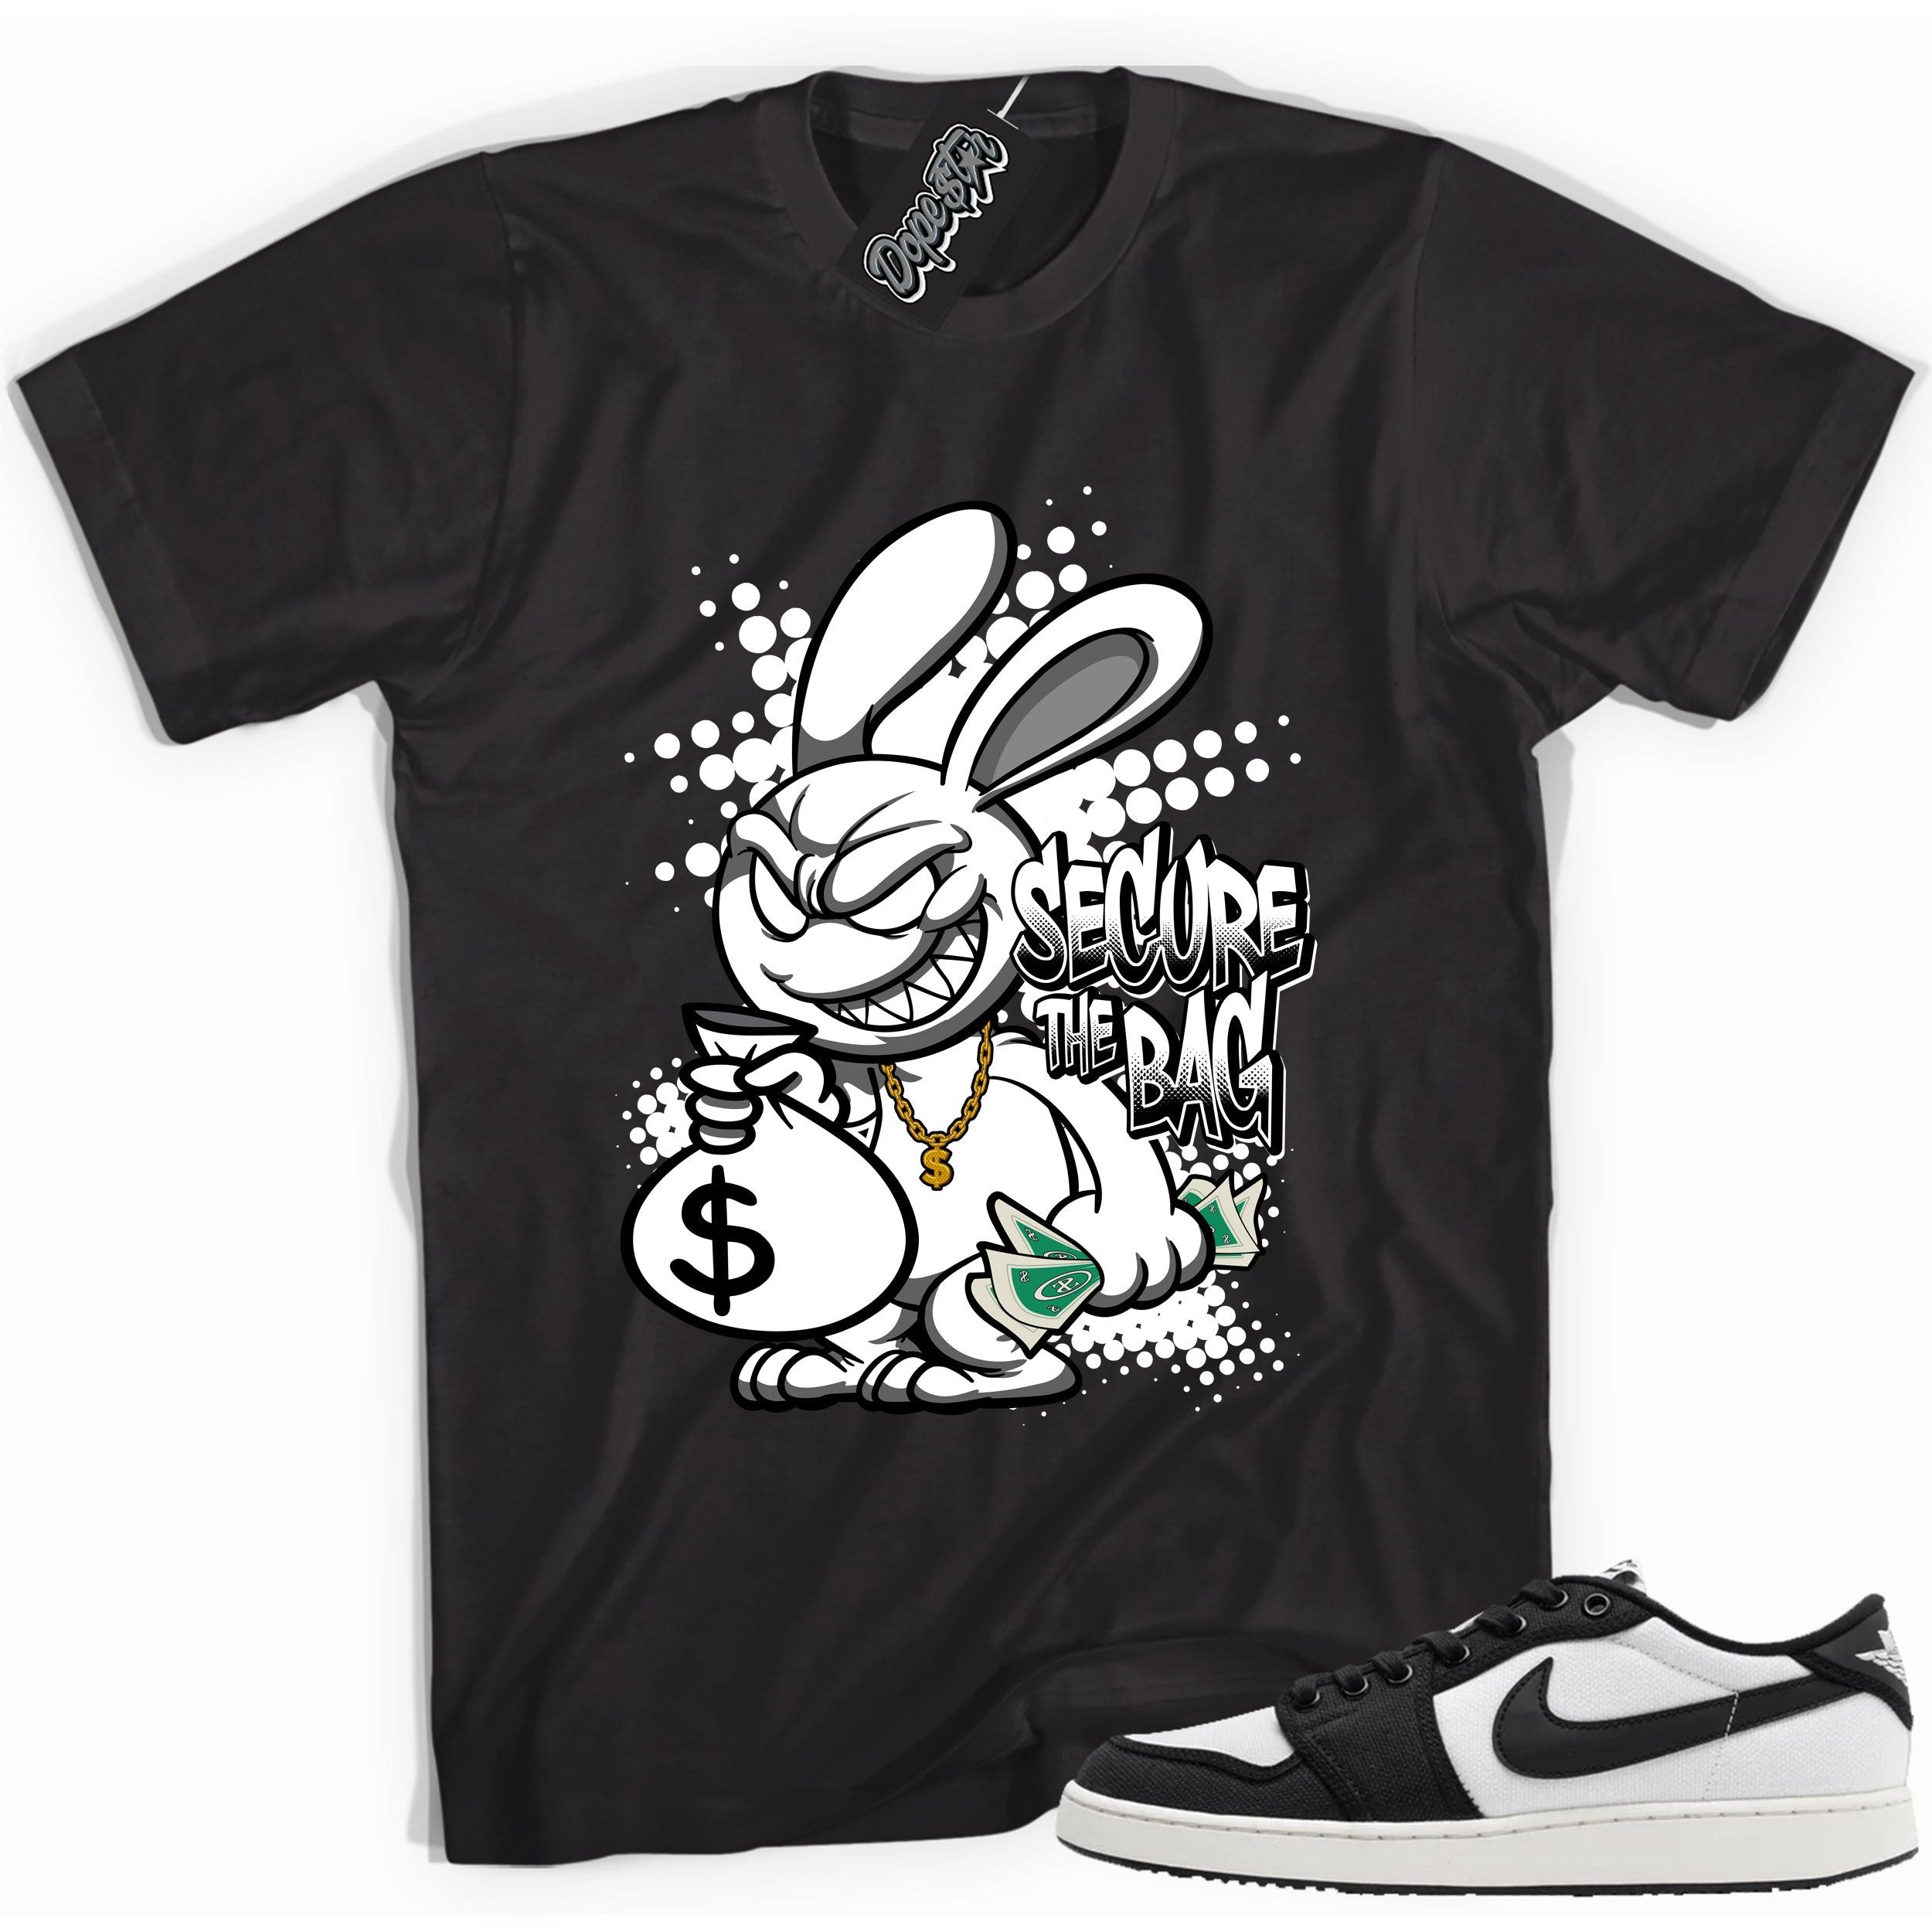 Cool black graphic tee with 'secure the bag' print, that perfectly matches Air Jordan 1 Retro Ajko Low Black & White sneakers.